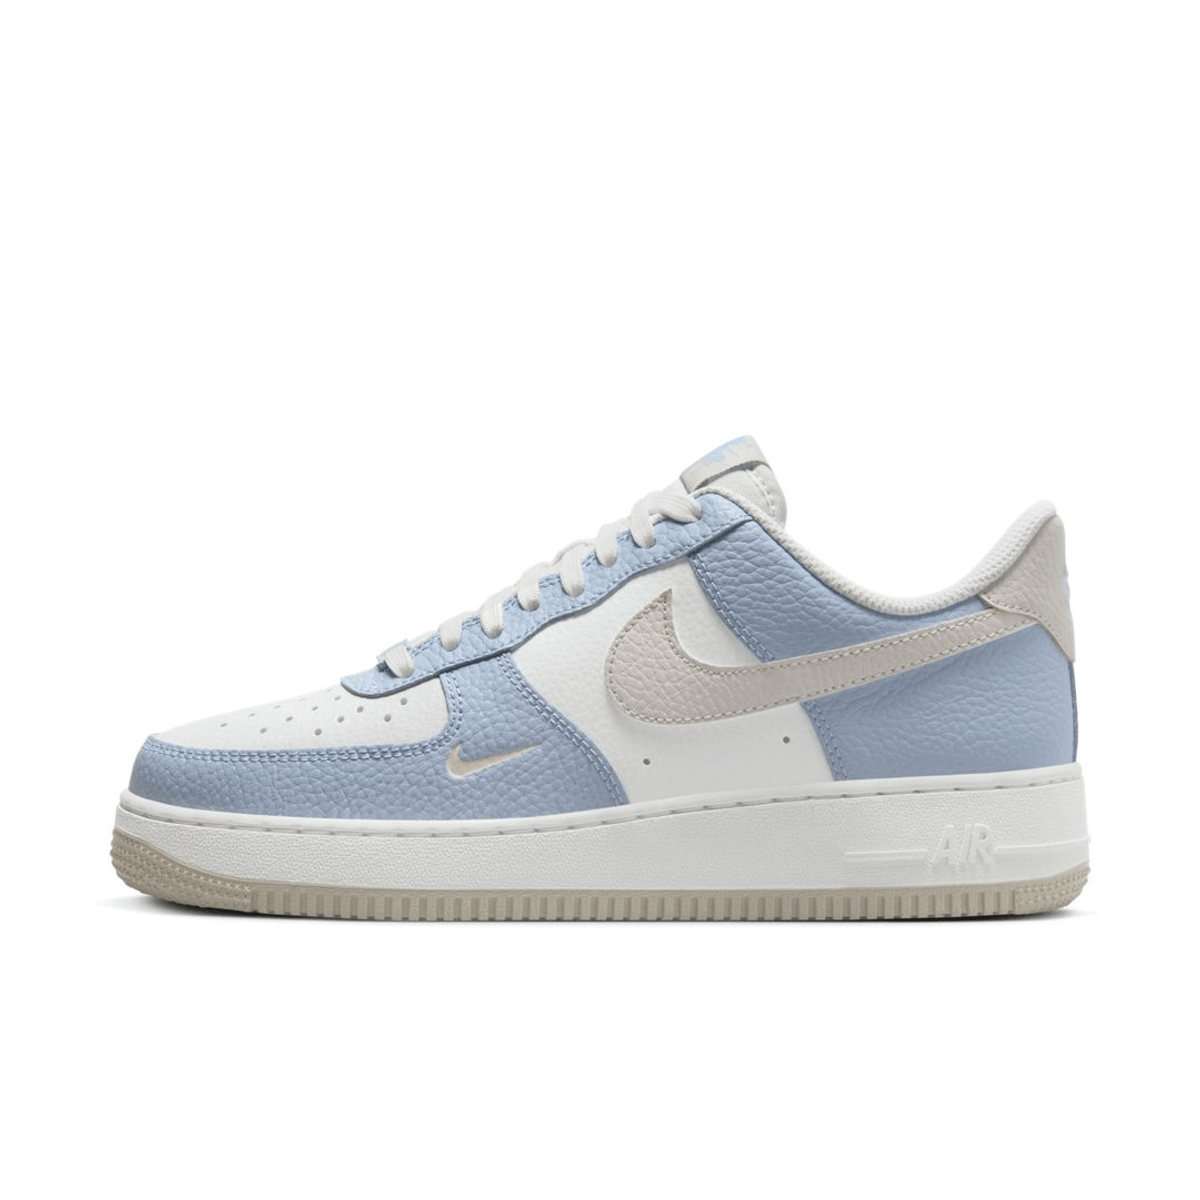 The Nike Air Force 1 Low Arrives In "Baby Blue/Grey"